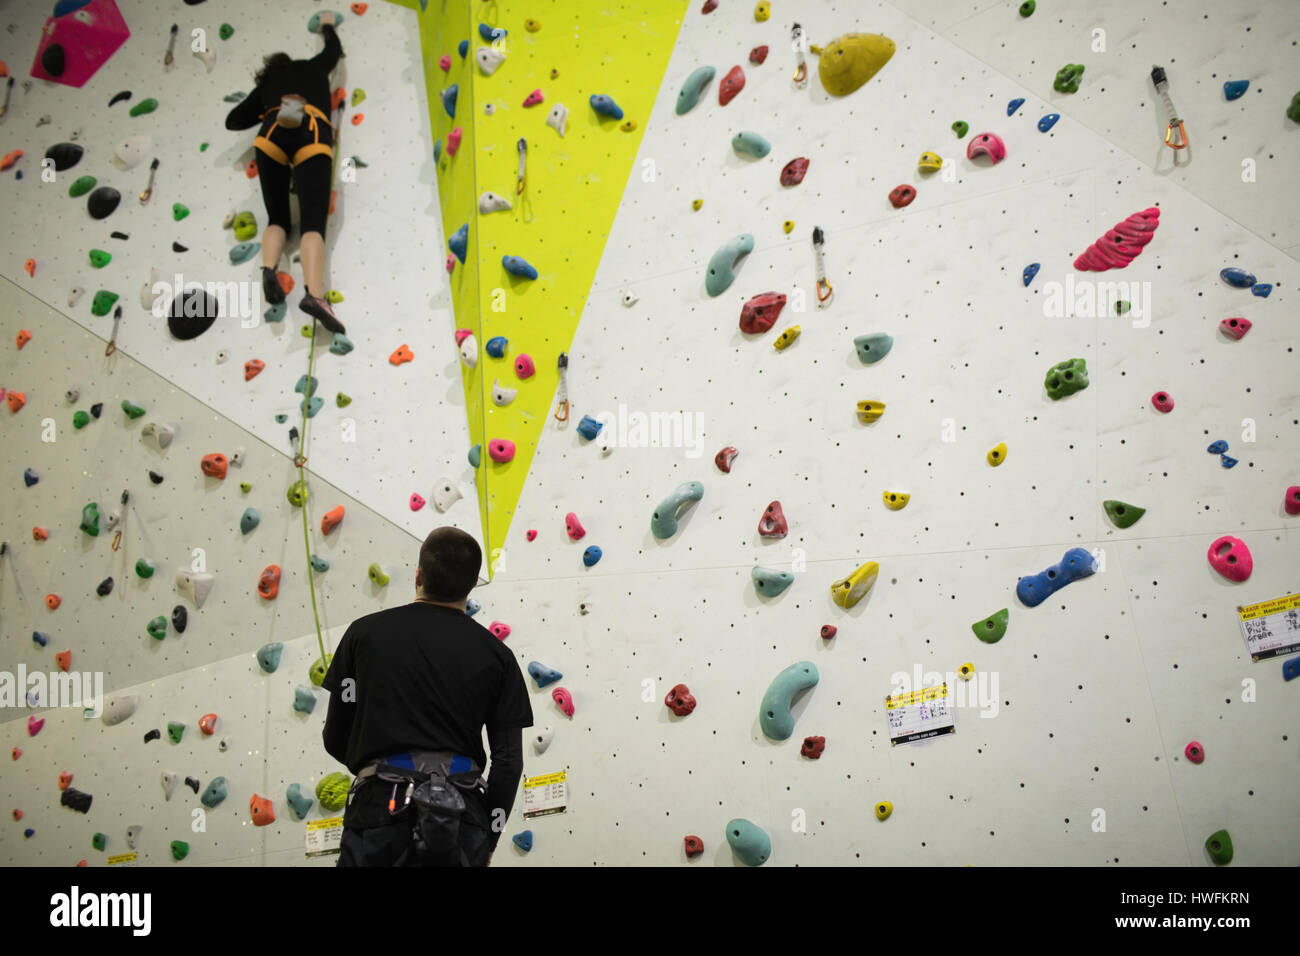 Trainer assisting woman while climbing on artificial wall in gym Stock Photo